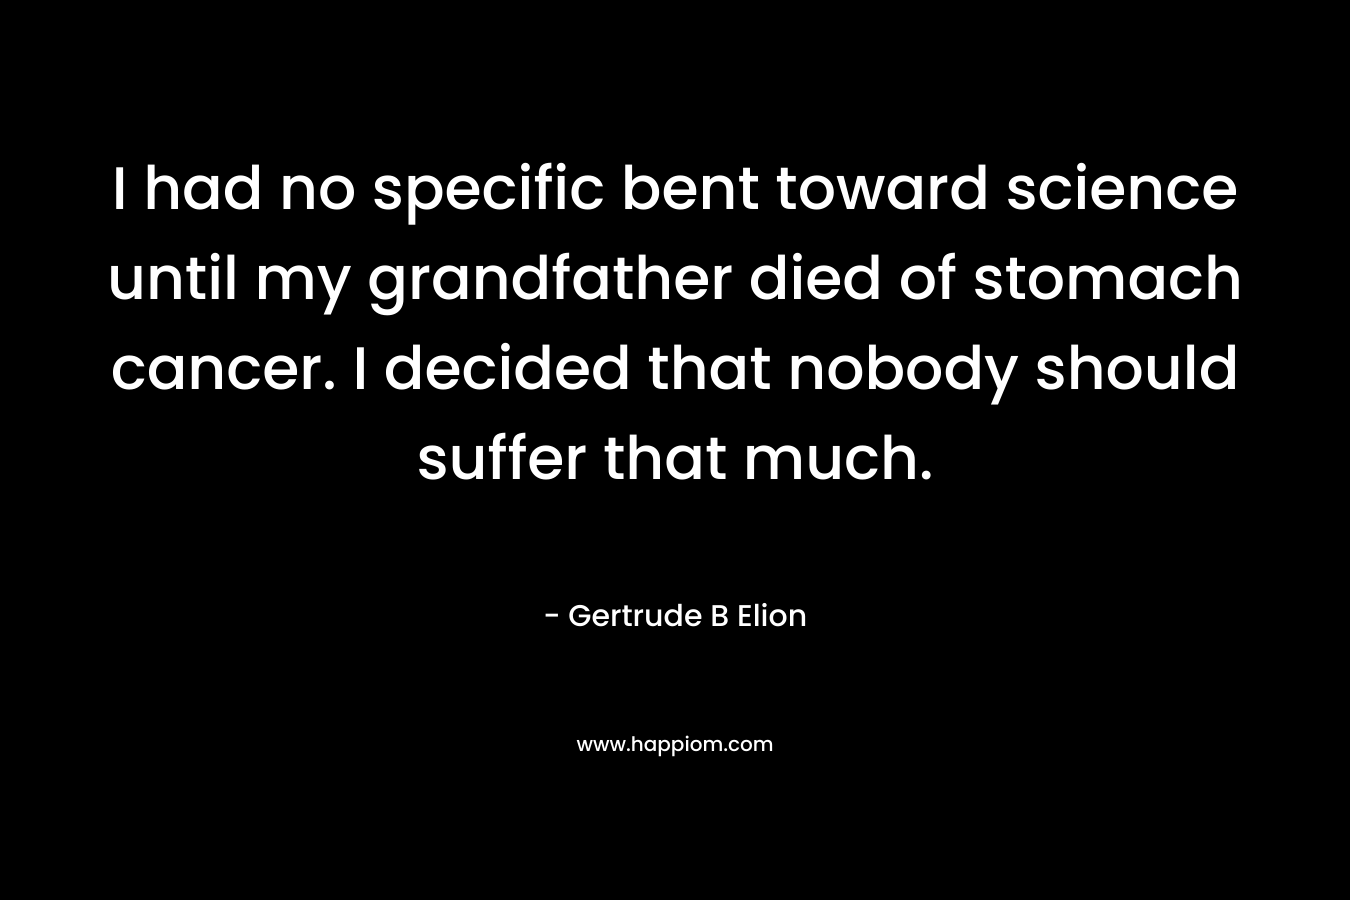 I had no specific bent toward science until my grandfather died of stomach cancer. I decided that nobody should suffer that much. – Gertrude B Elion